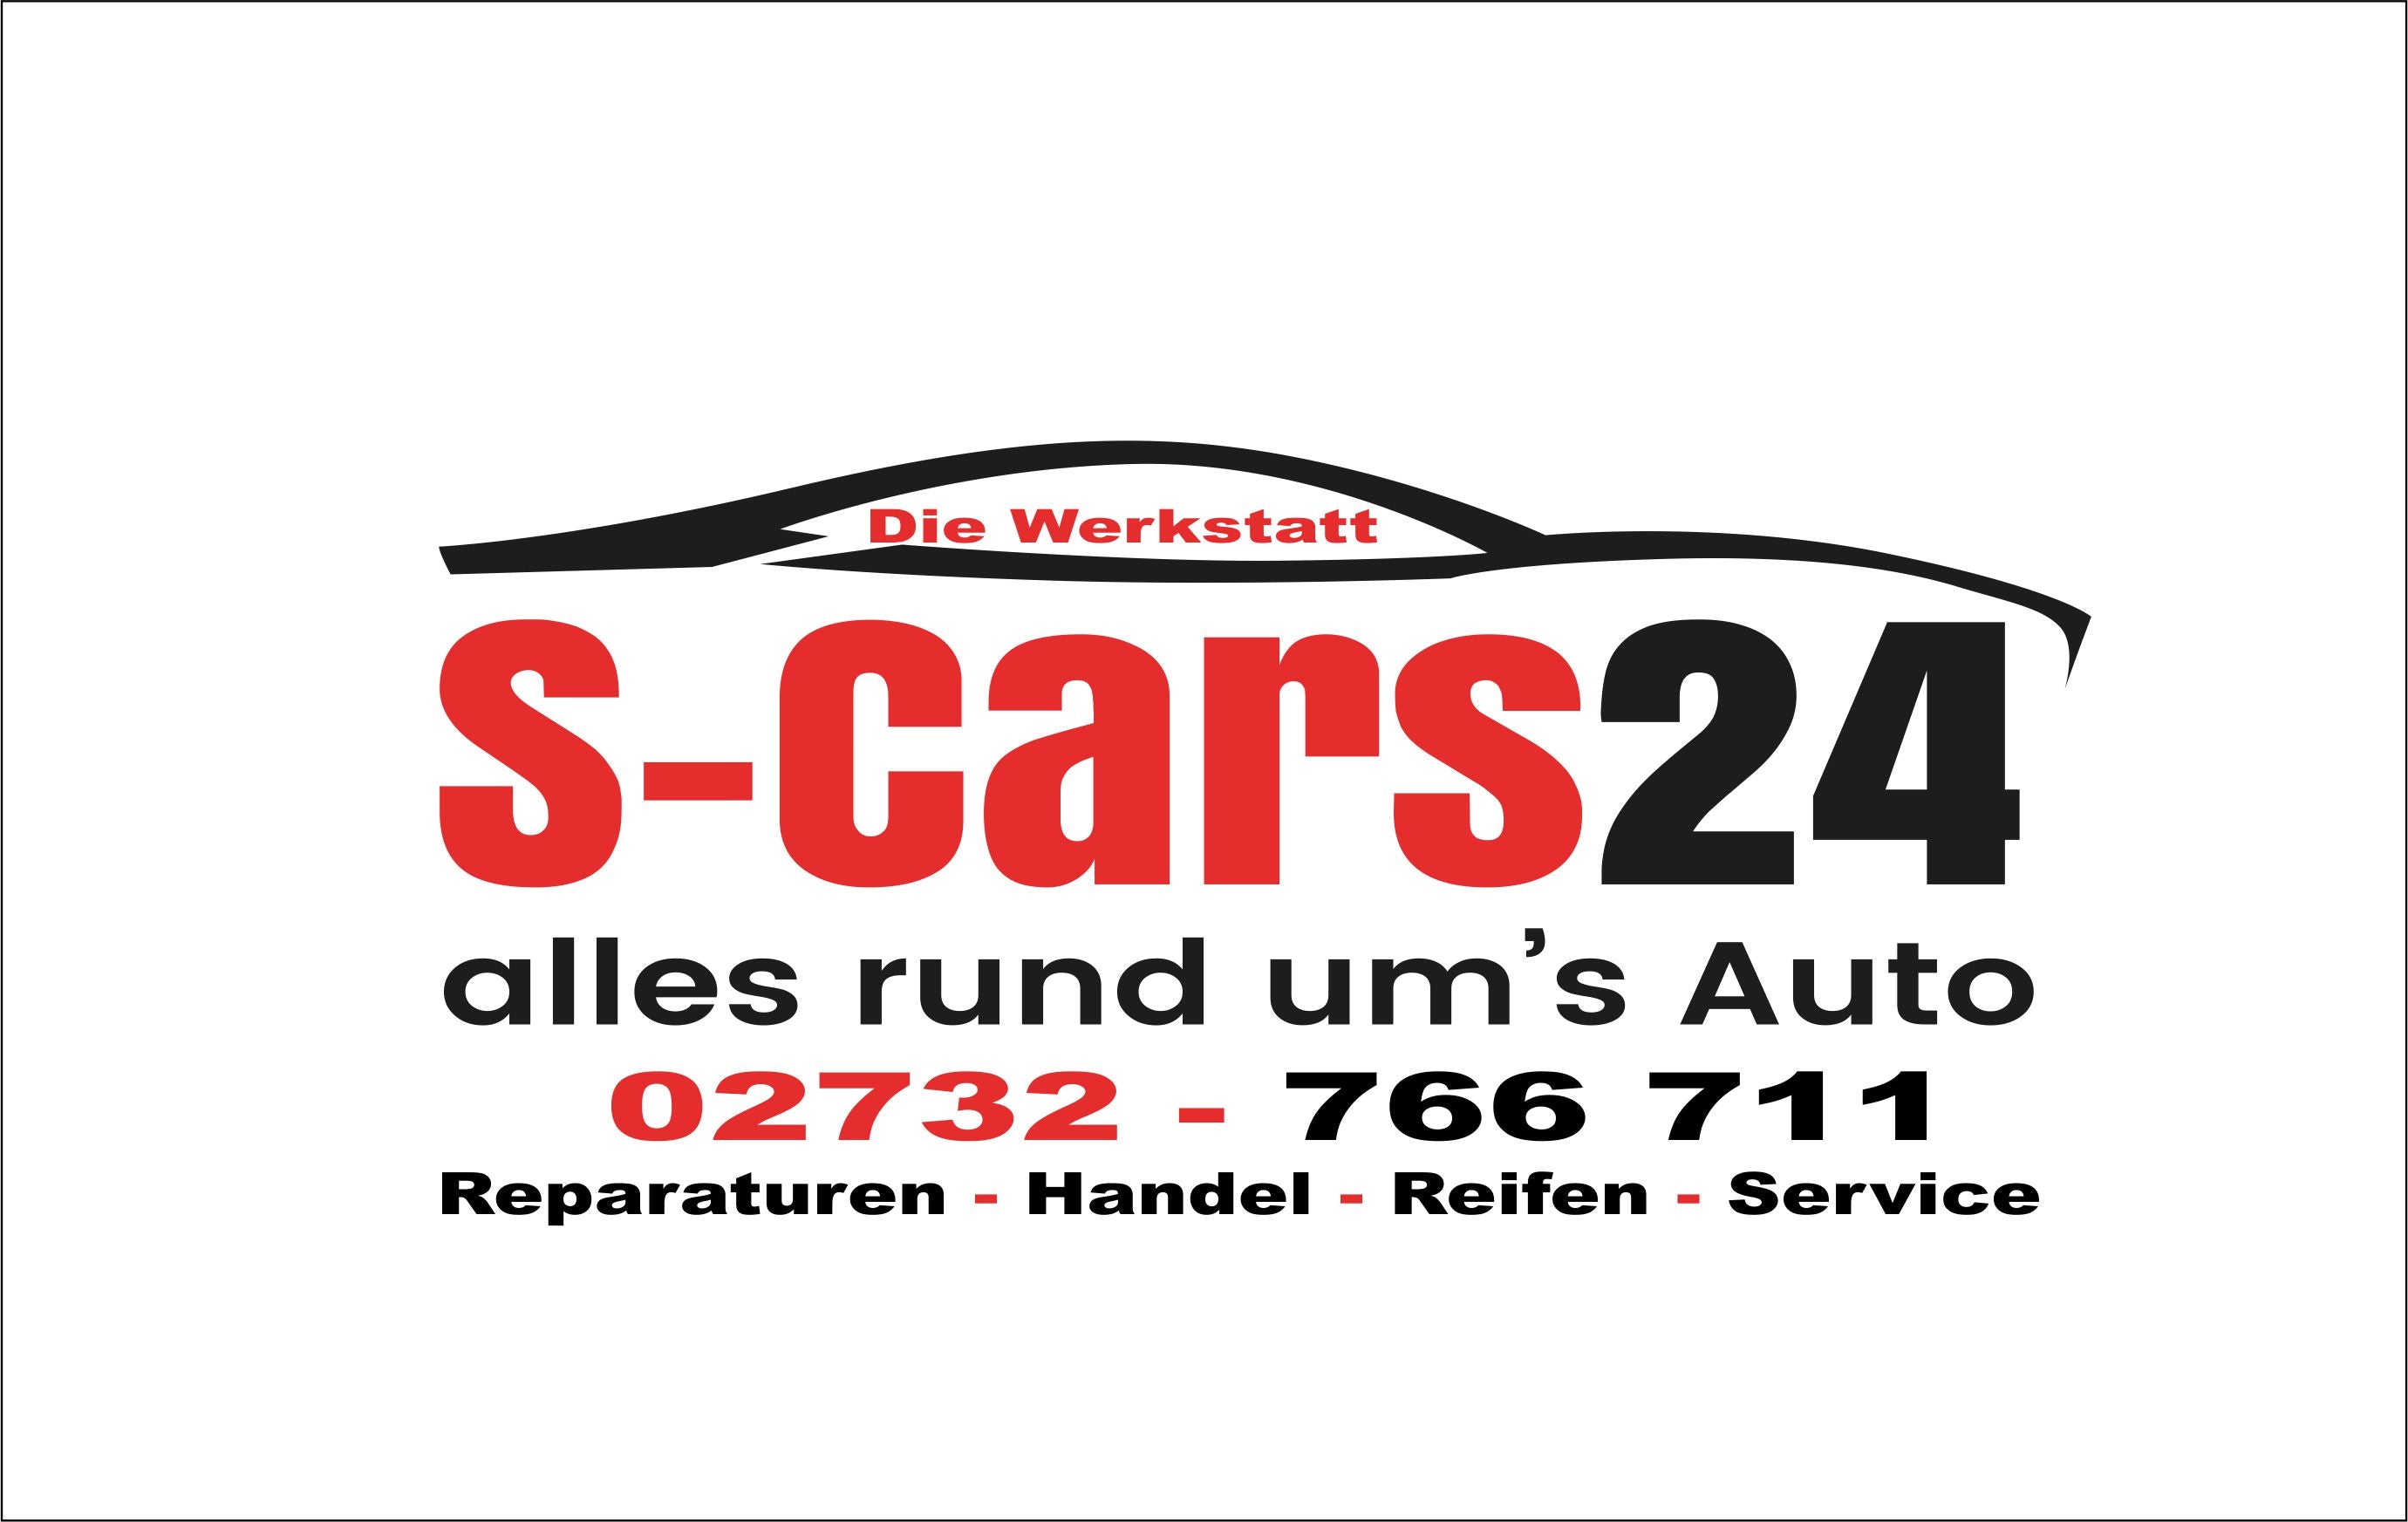 P2PCarz : Buy / Sell Used Cars - Apps on Google Play